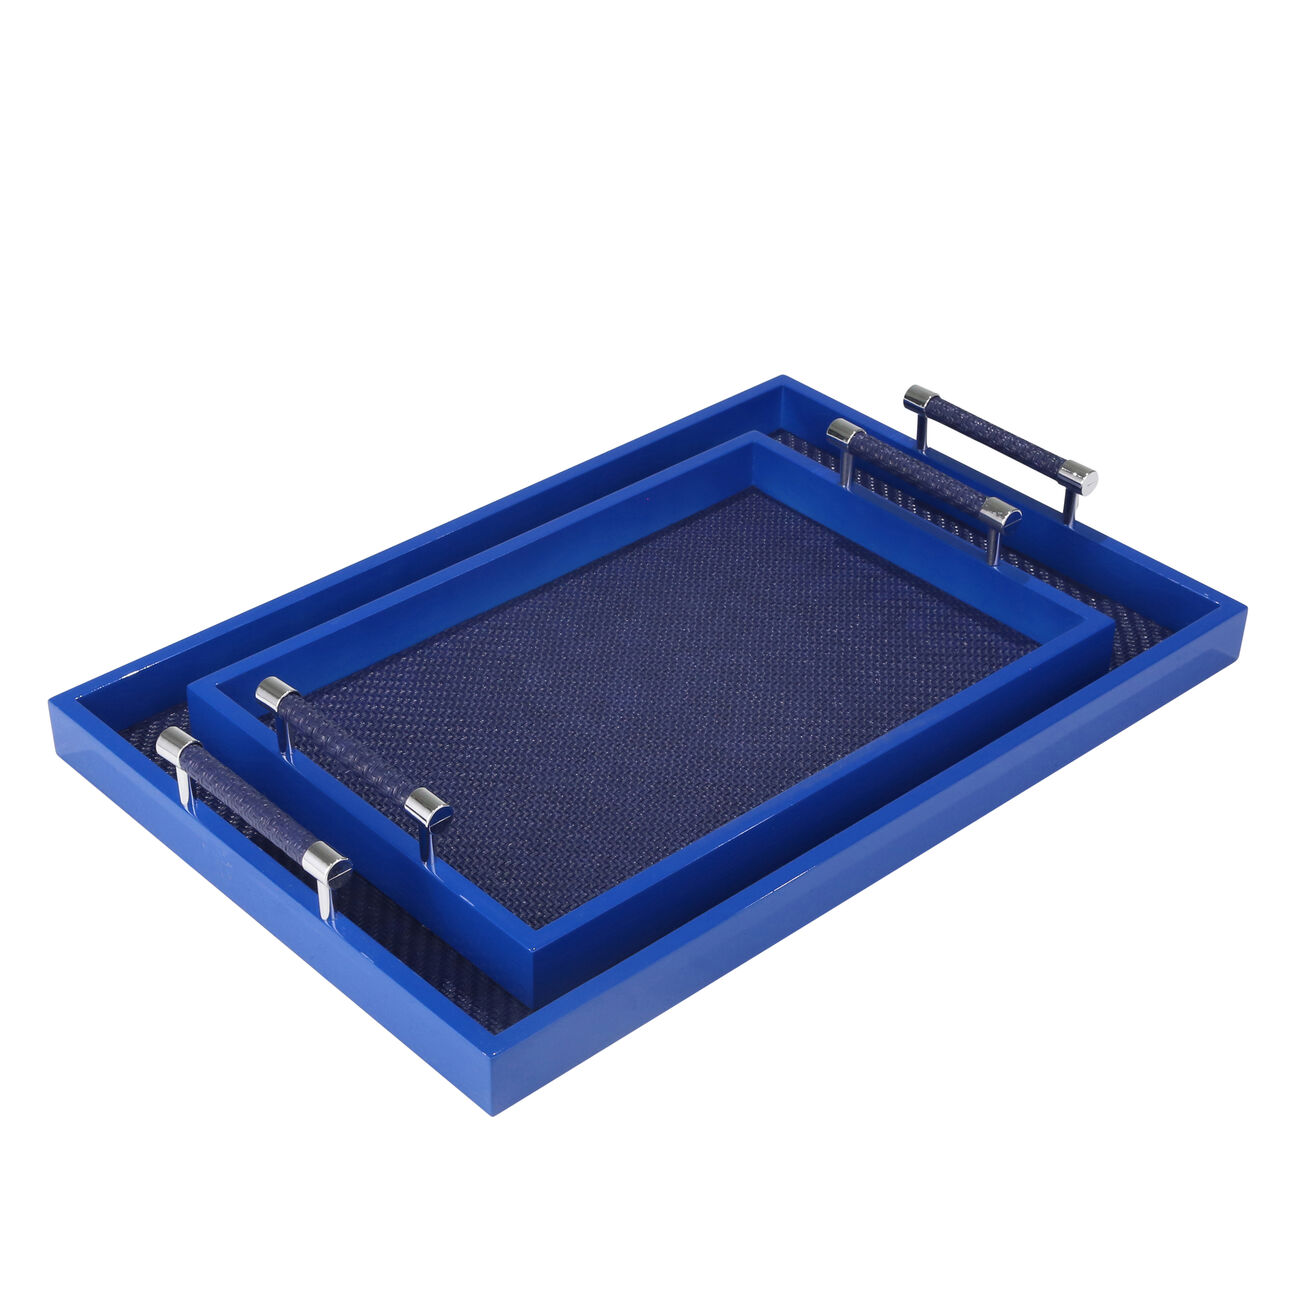 Rectangular Wooden Tray with Leatherette Base, Set of 2, Navy Blue